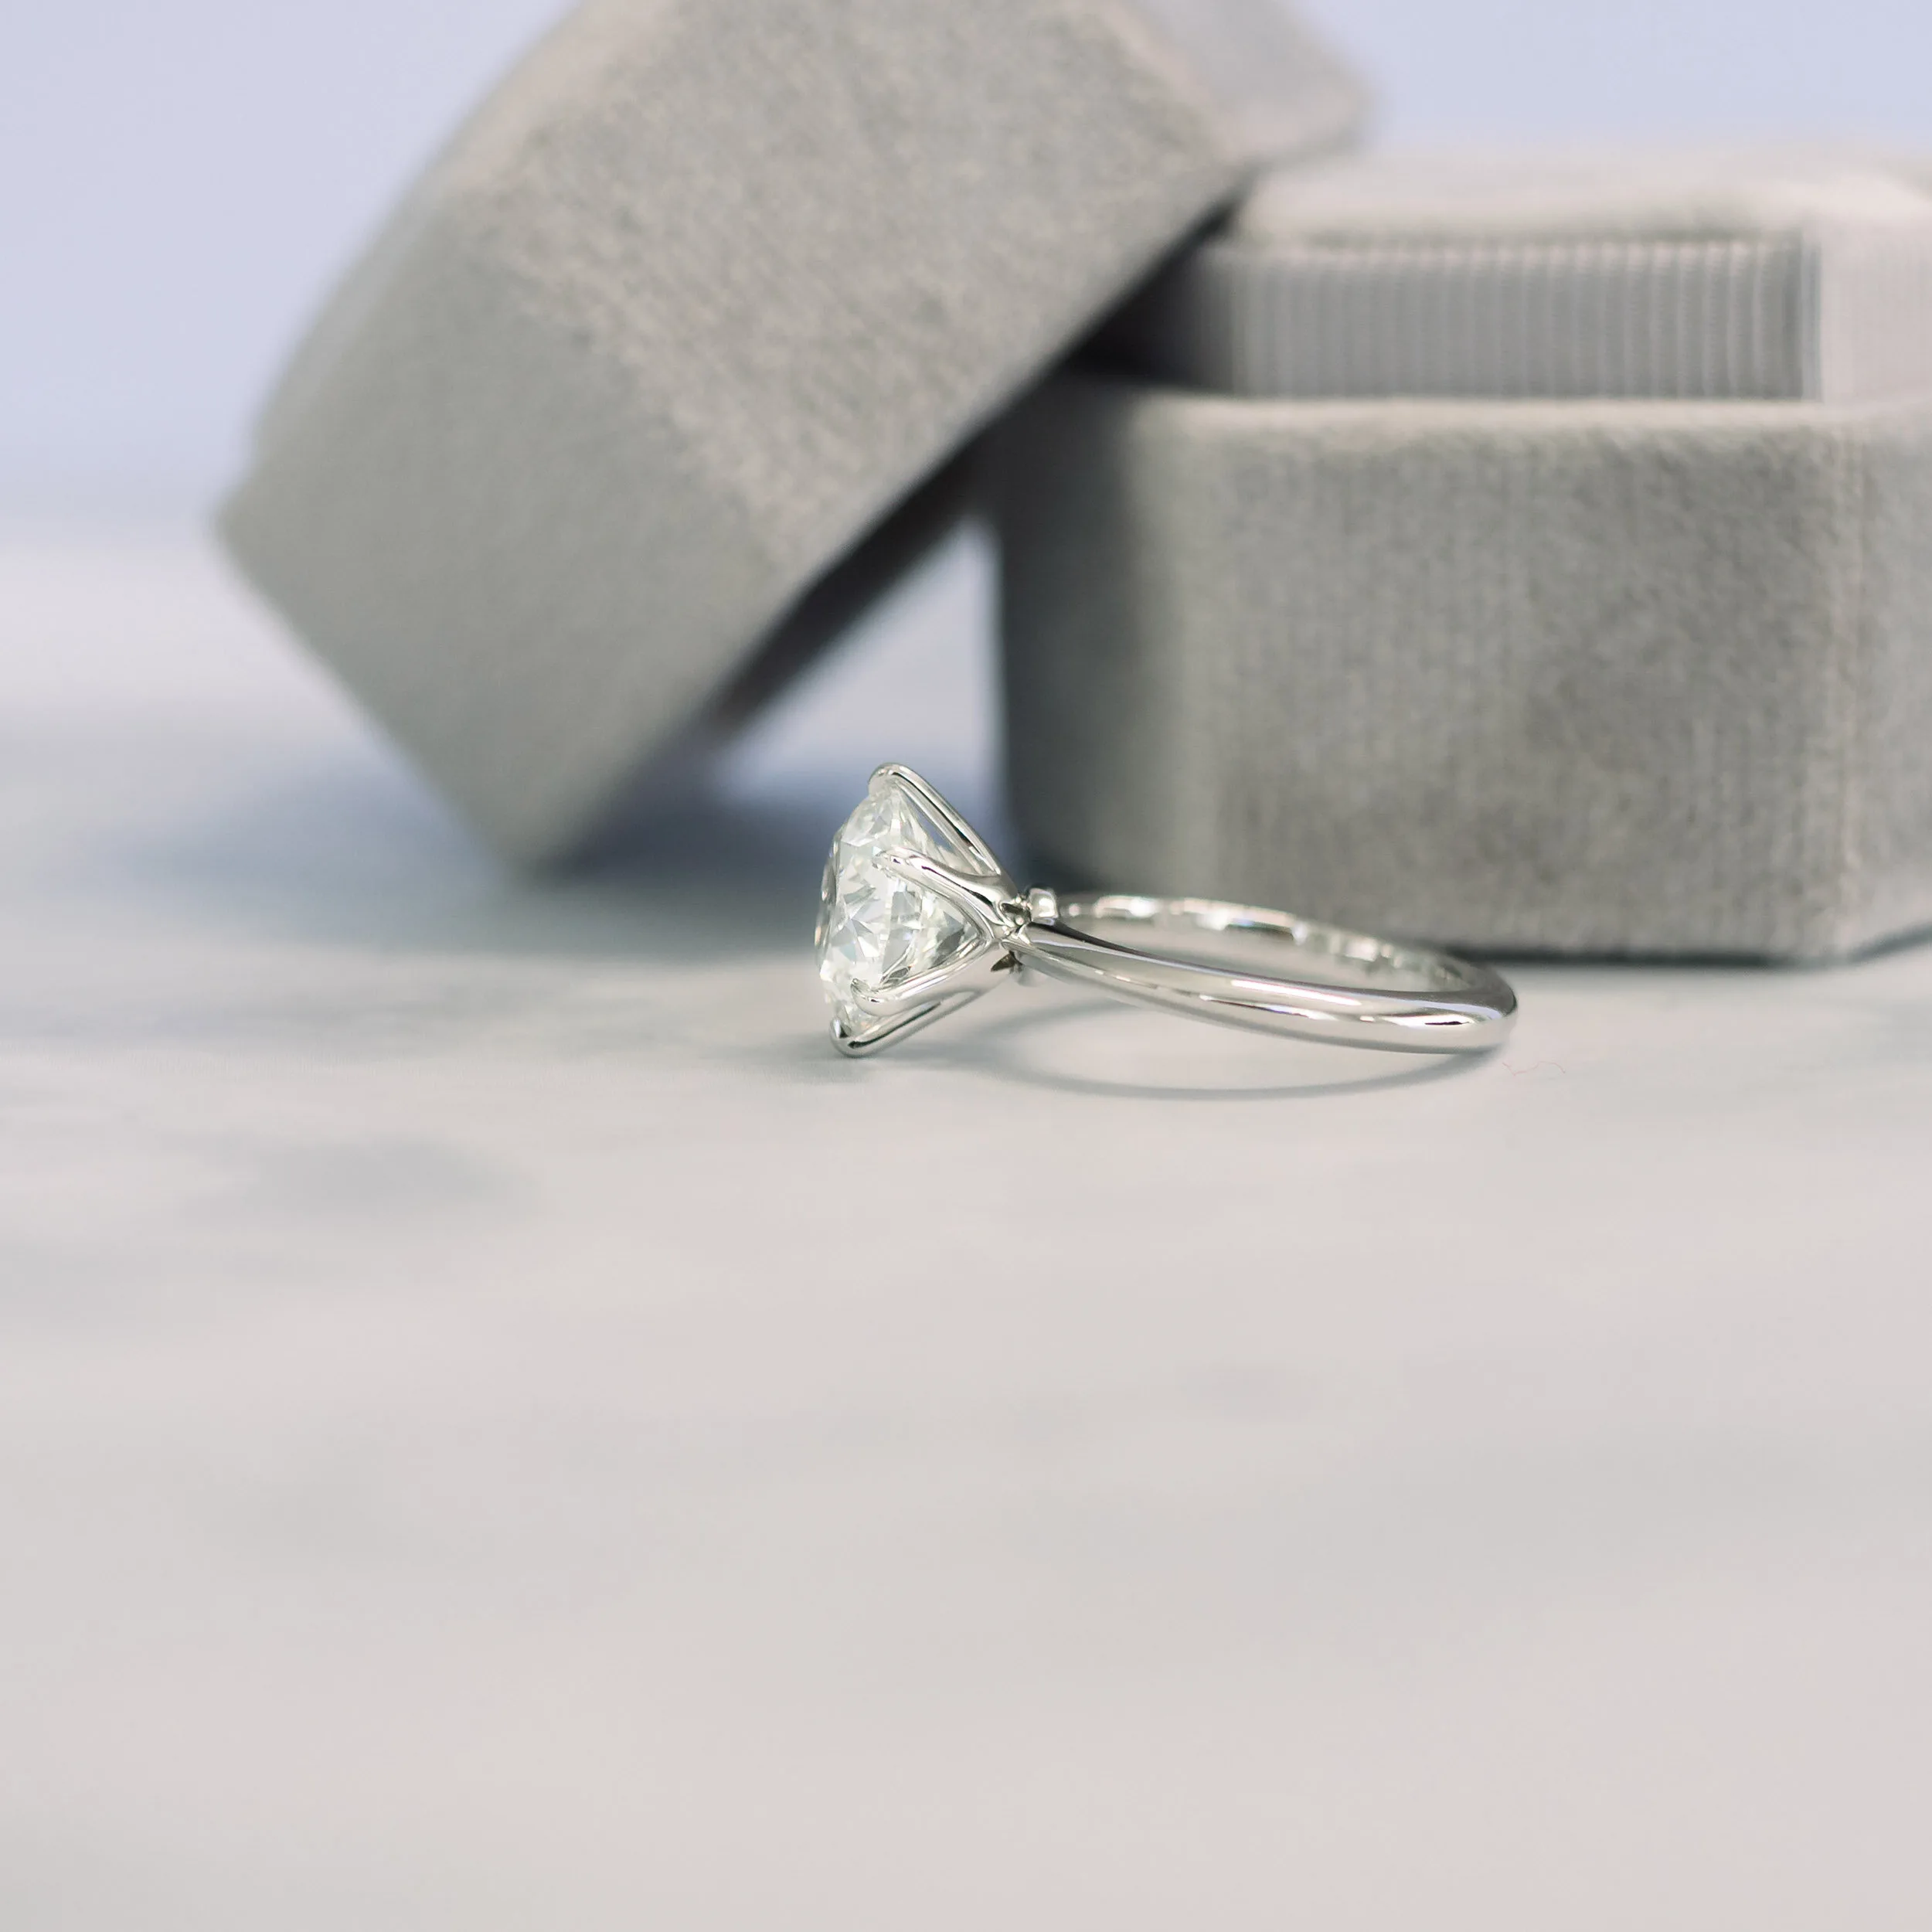 lab diamond engagement ring with knife edge band